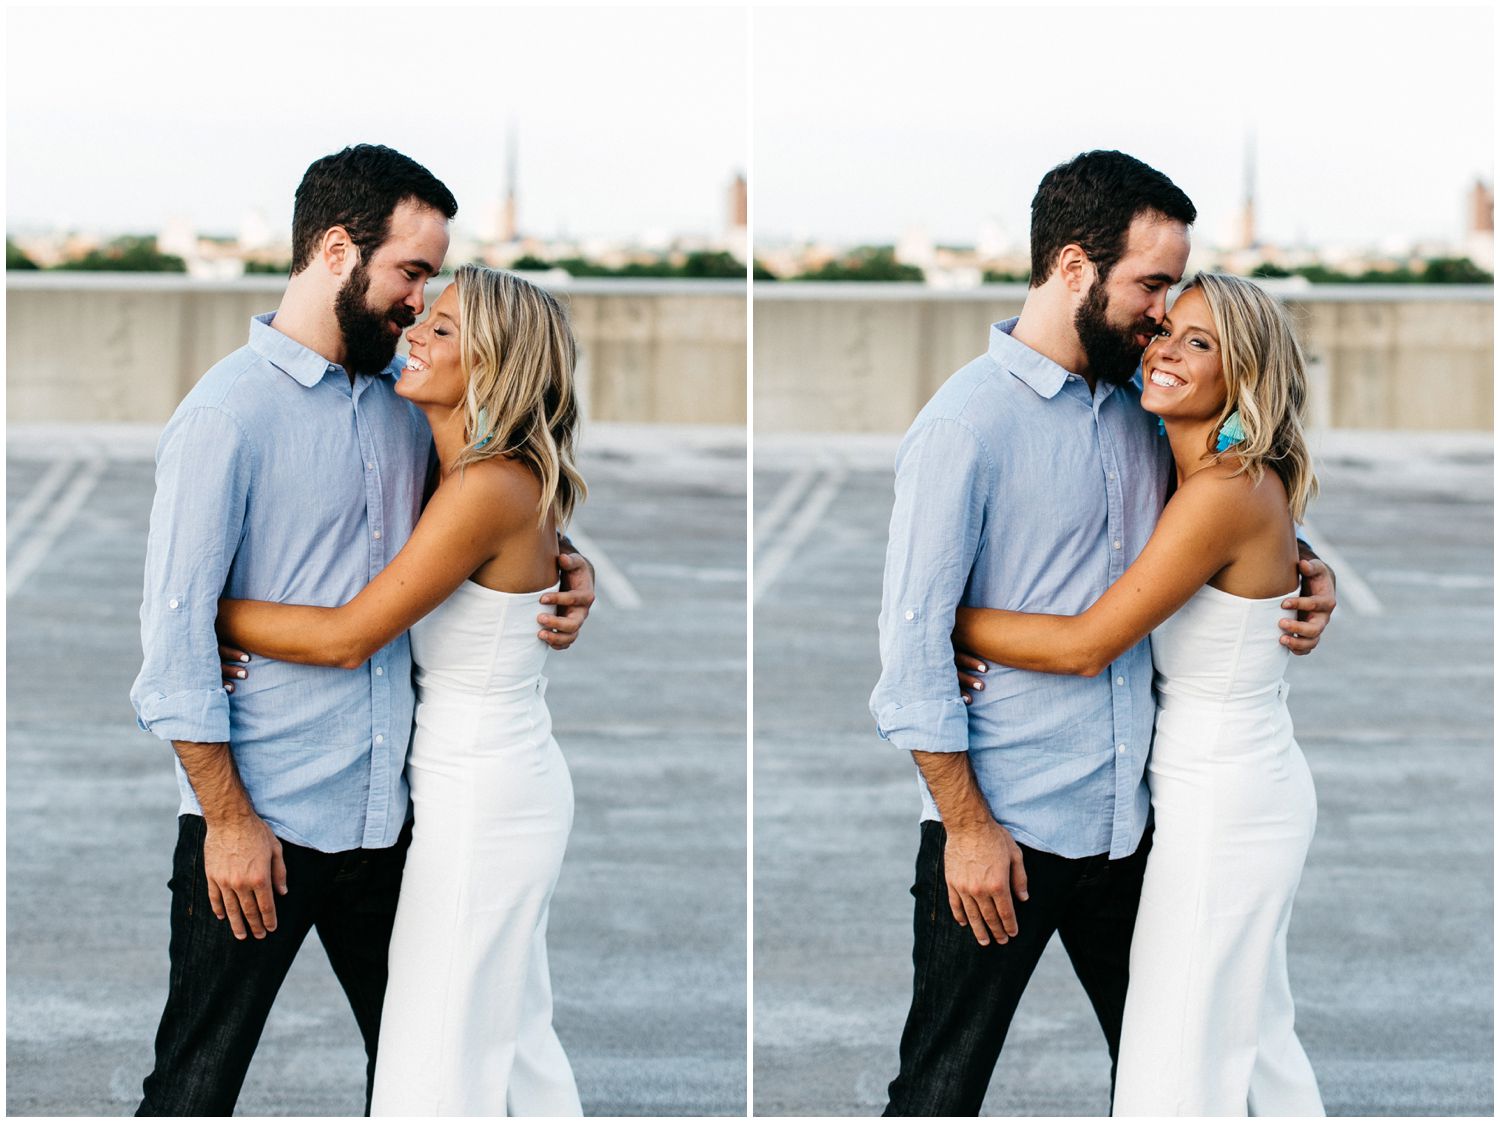 Rooftop engagement session and white jumpsuit